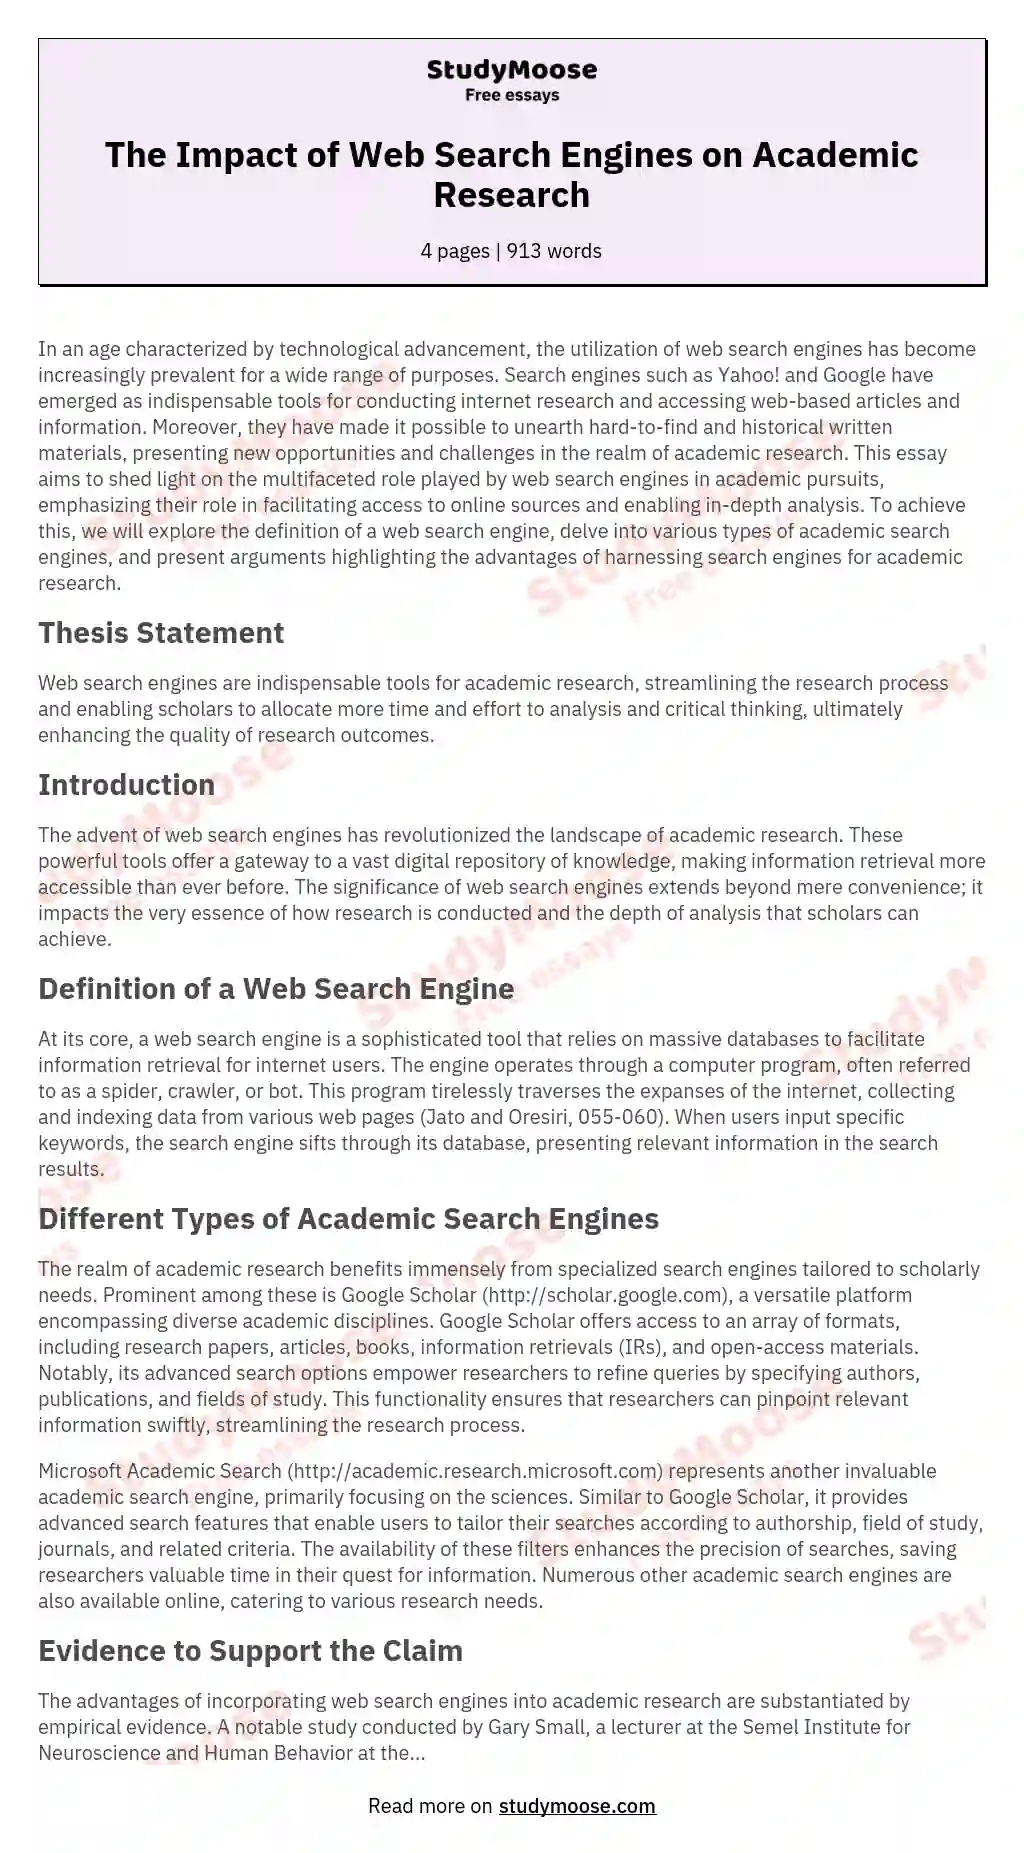 The Impact of Web Search Engines on Academic Research essay